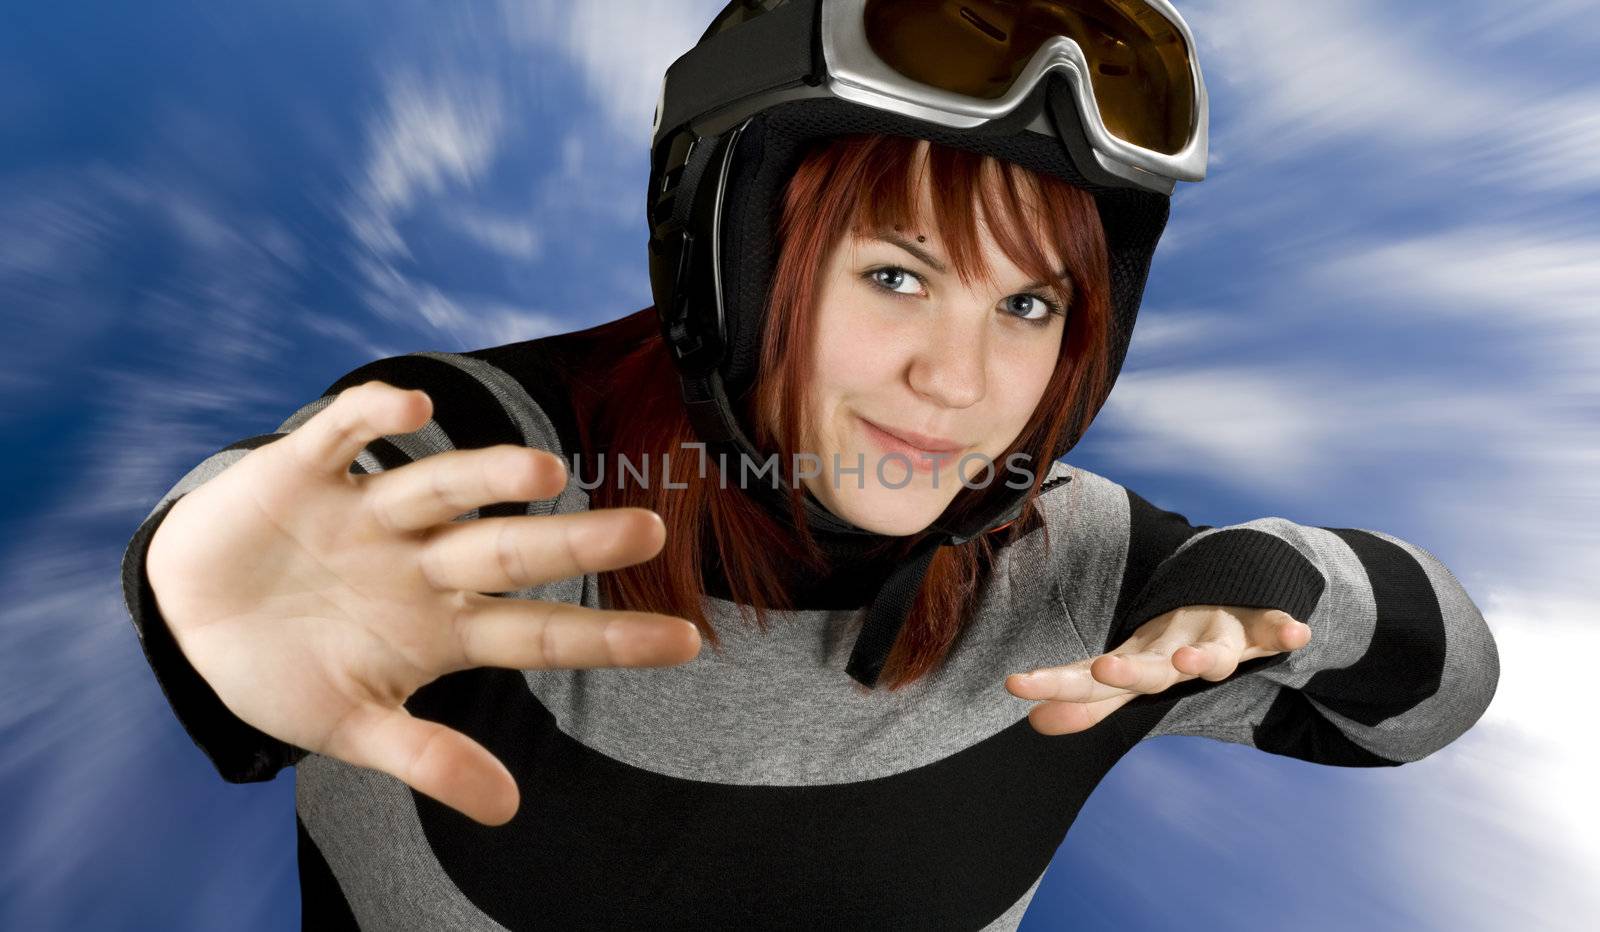 Cute girl freely snowboarding in a blue sky.

Studio shot, composite.